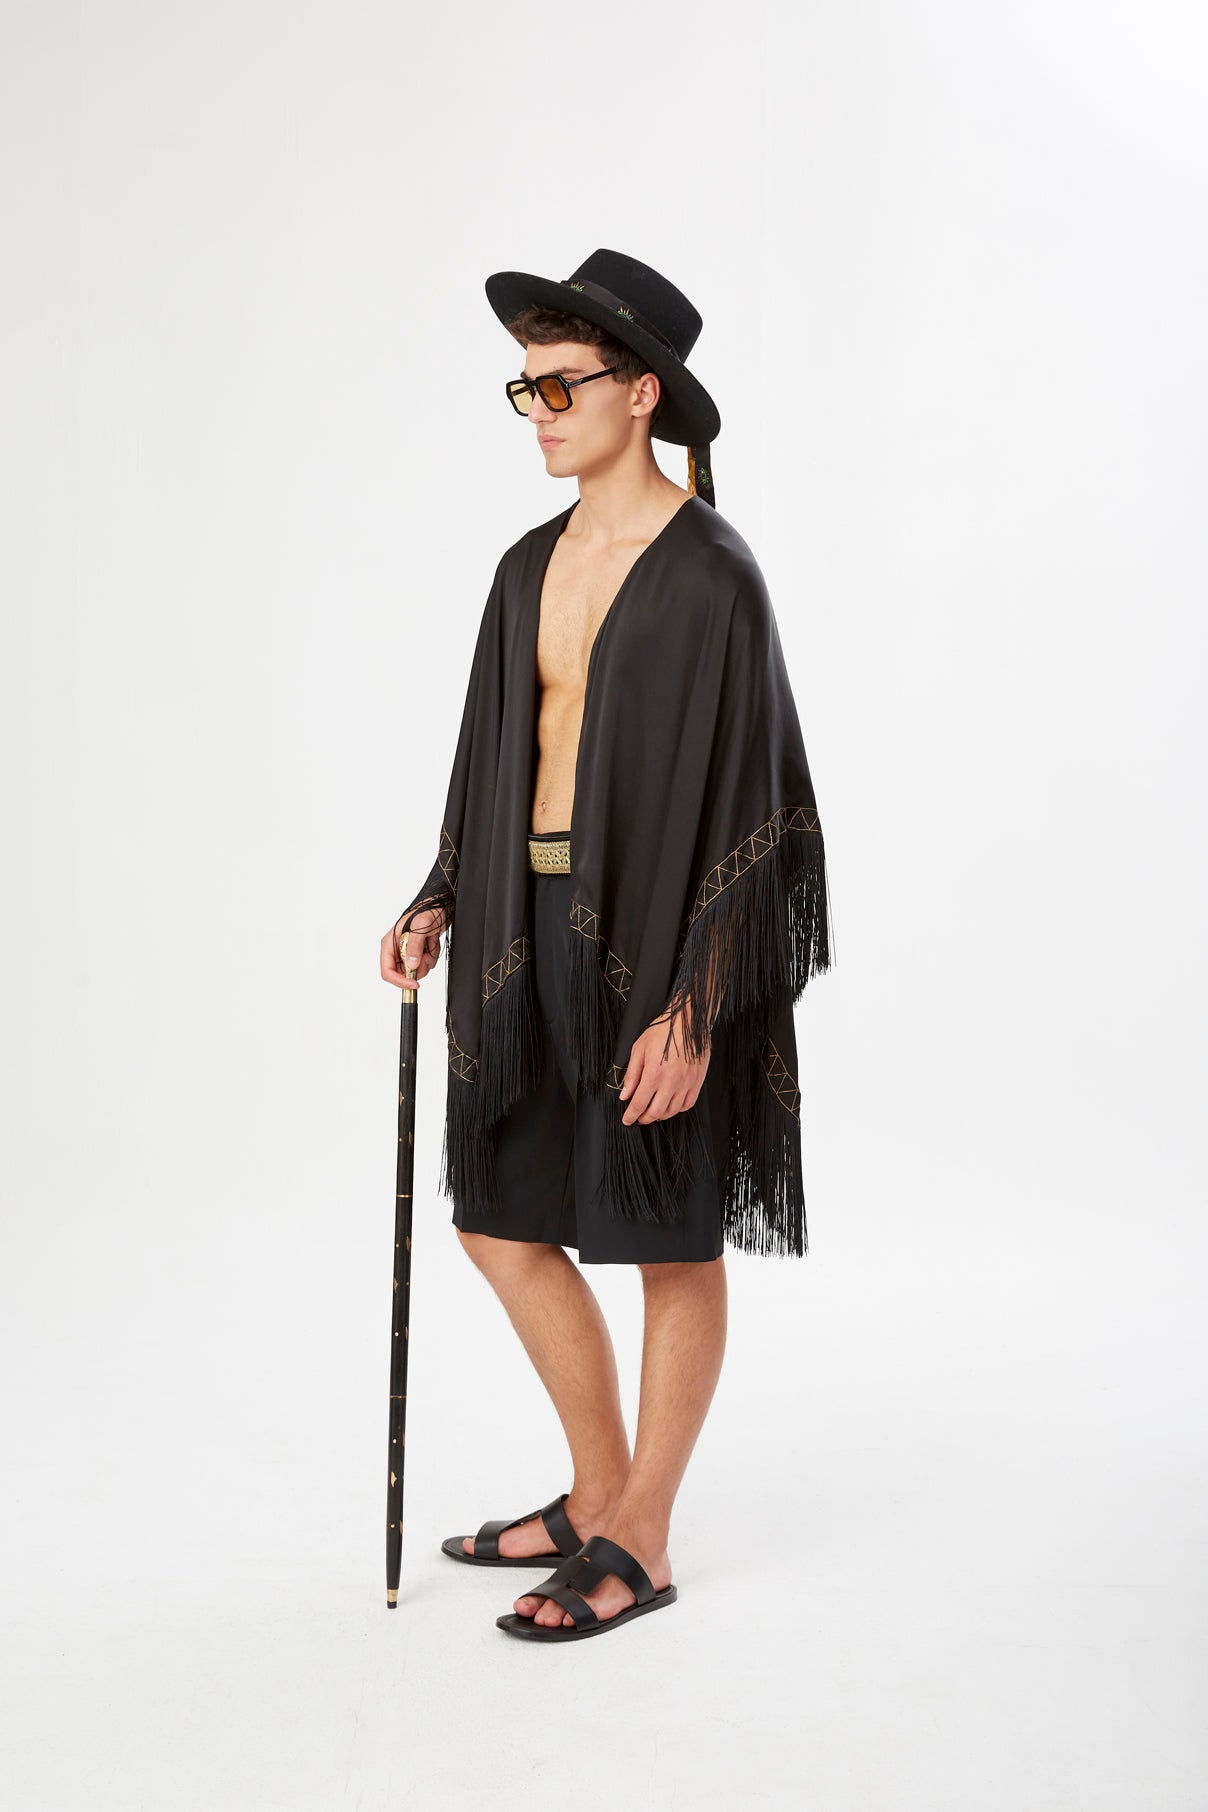 The Nomad Poncho